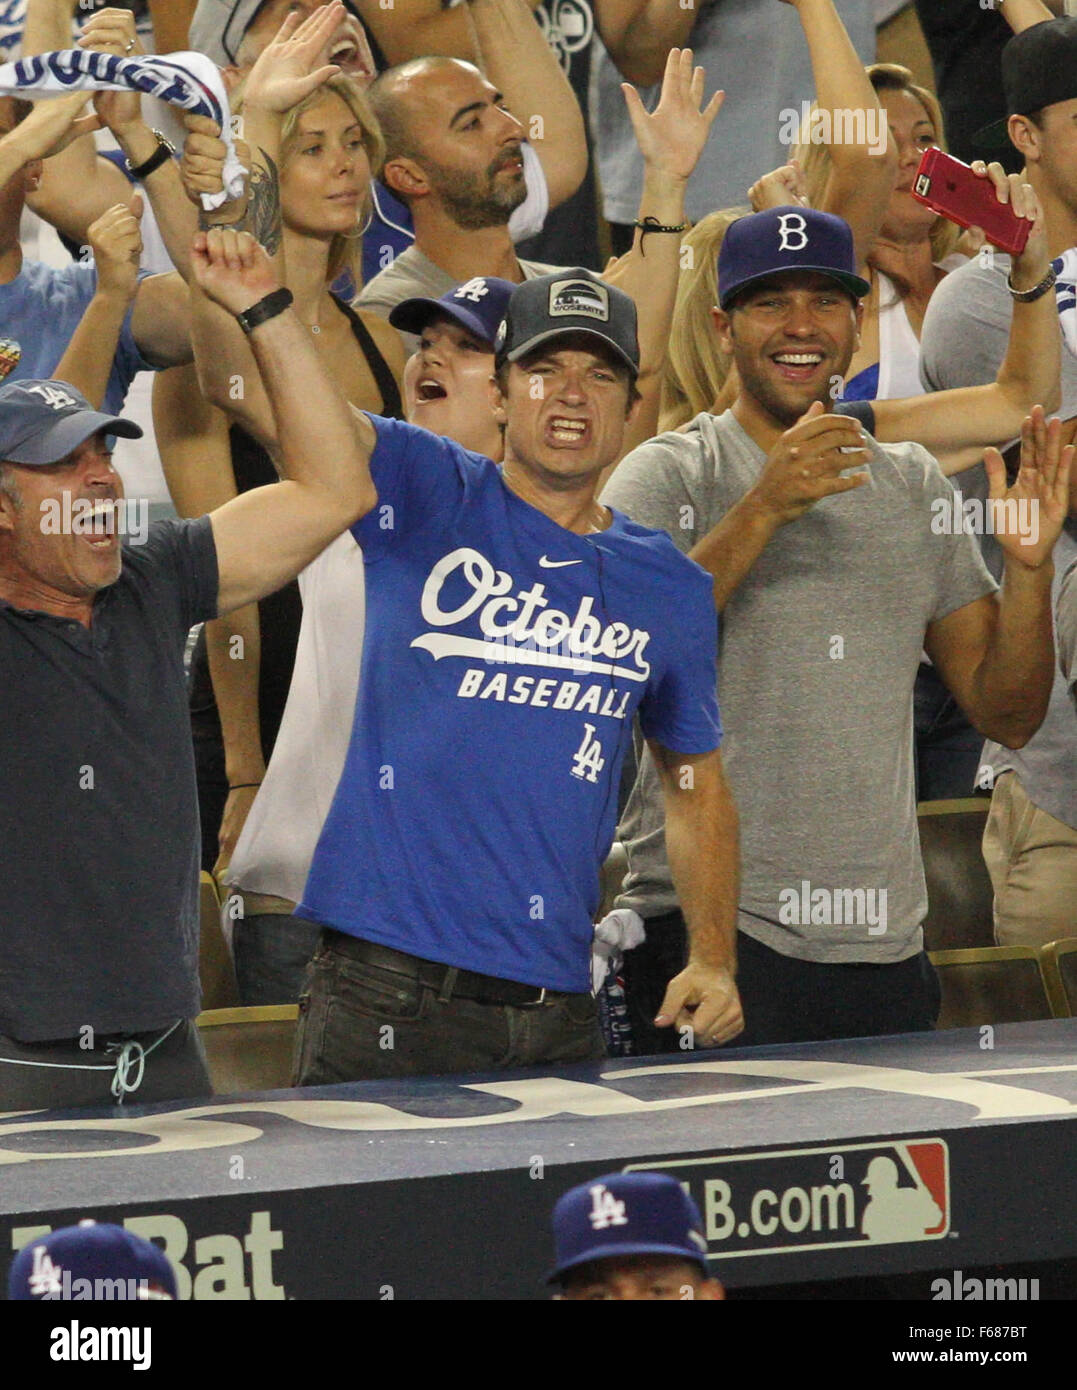 Jason Bateman is a big time Dodgers Fan. Jason is seen being thrilled after  the Los Angeles Dodgers defeated the New York Mets by the final score of  5-2 in Game 2